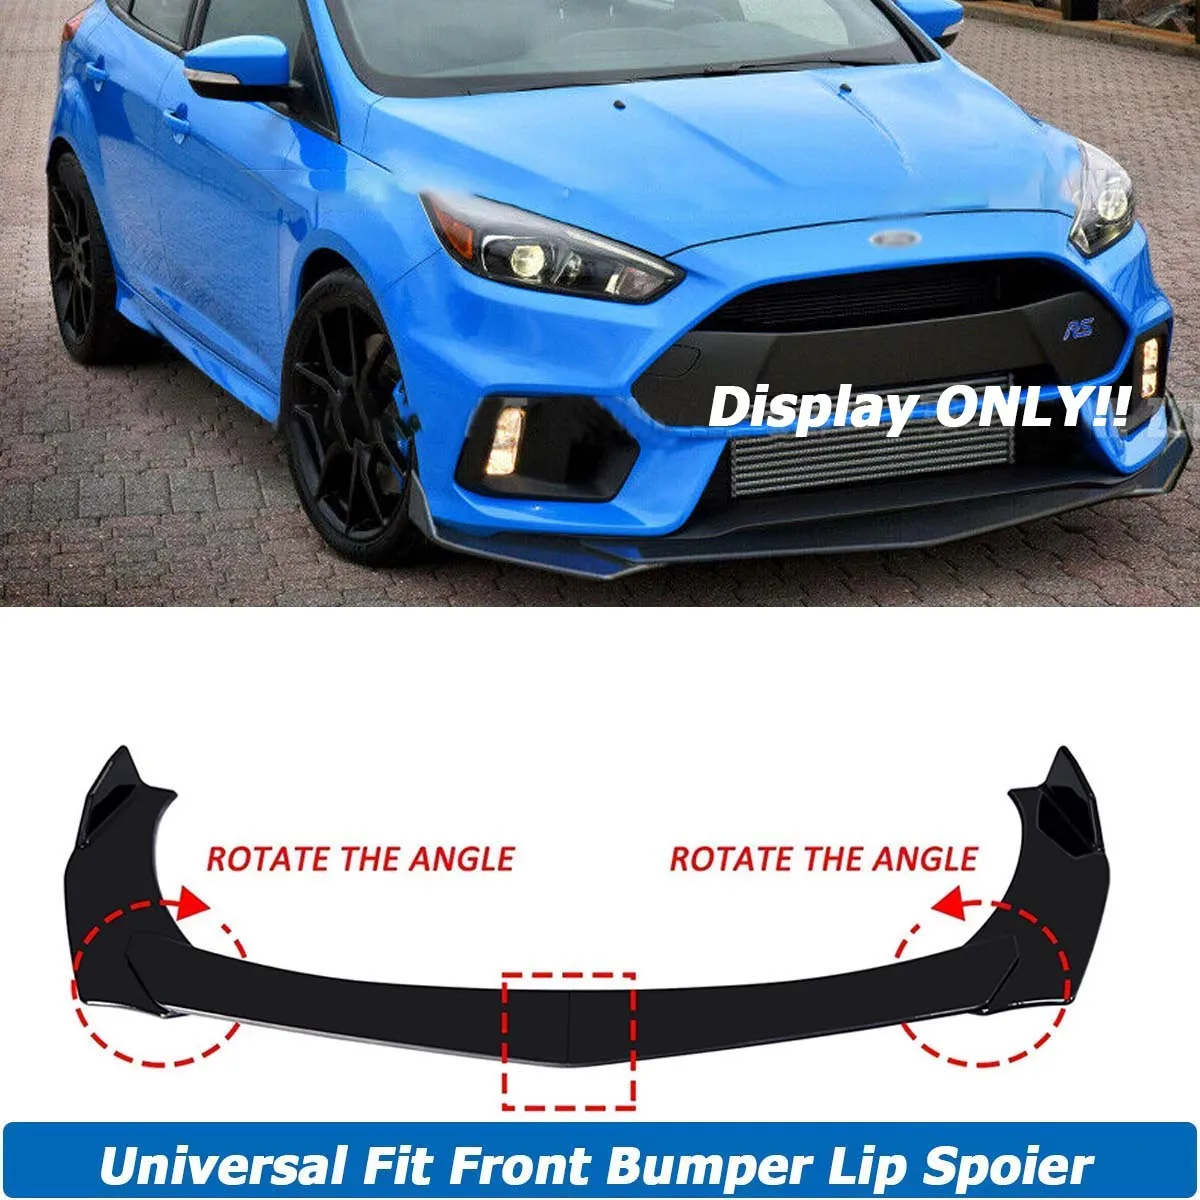 Universal For Ford Focus RS SE Sedan Front Bumper Lip Spoiler Side Splitter Deflector Body Kit Guards Protection Car Accessories